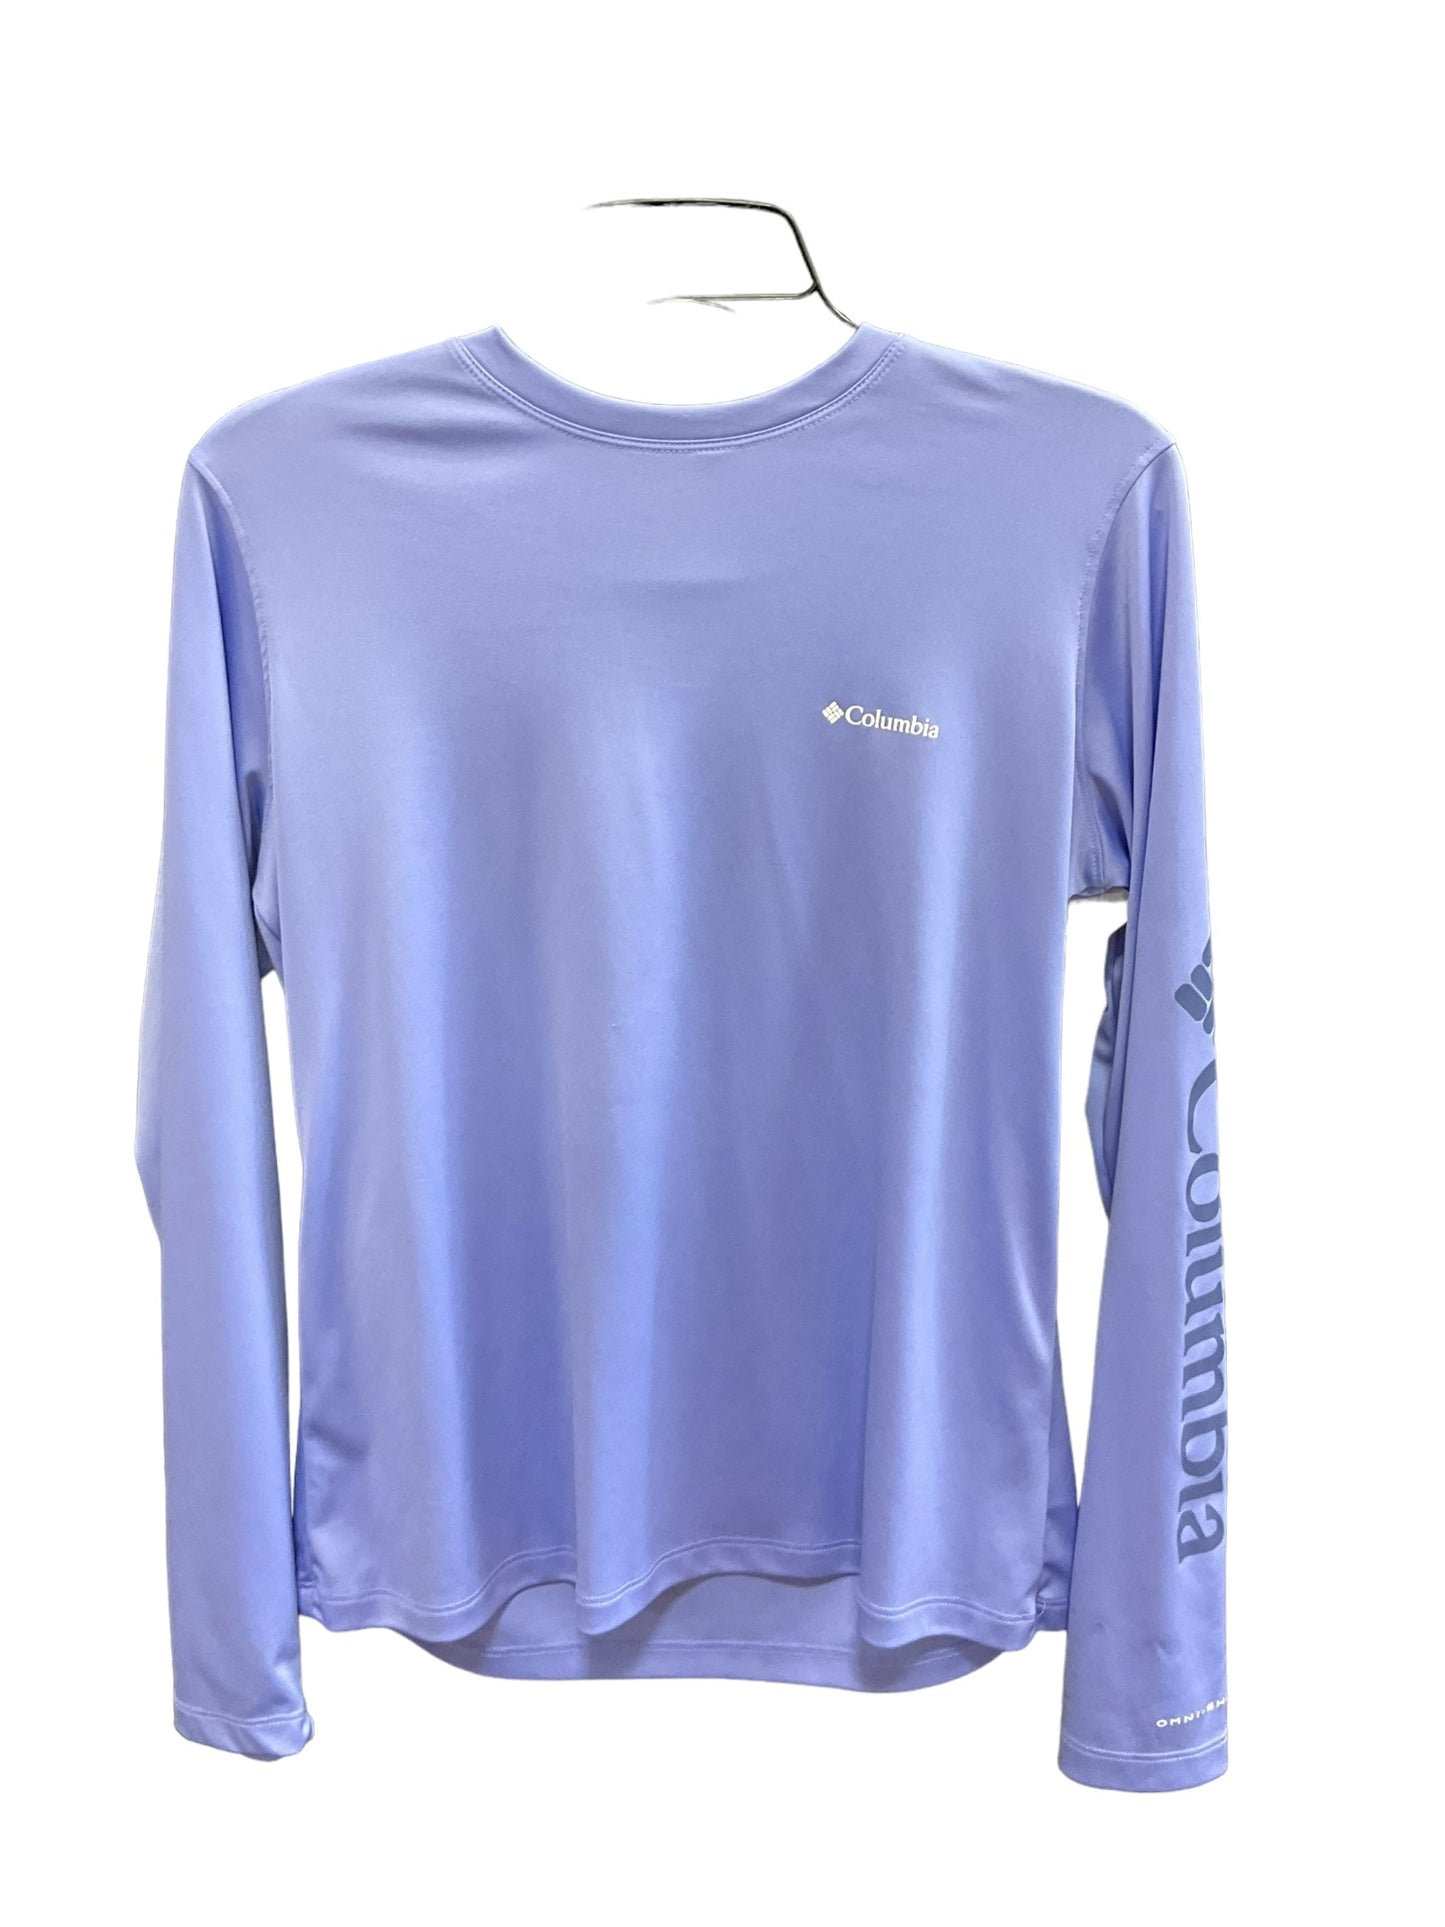 Blue Athletic Top Long Sleeve Crewneck Columbia, Size M